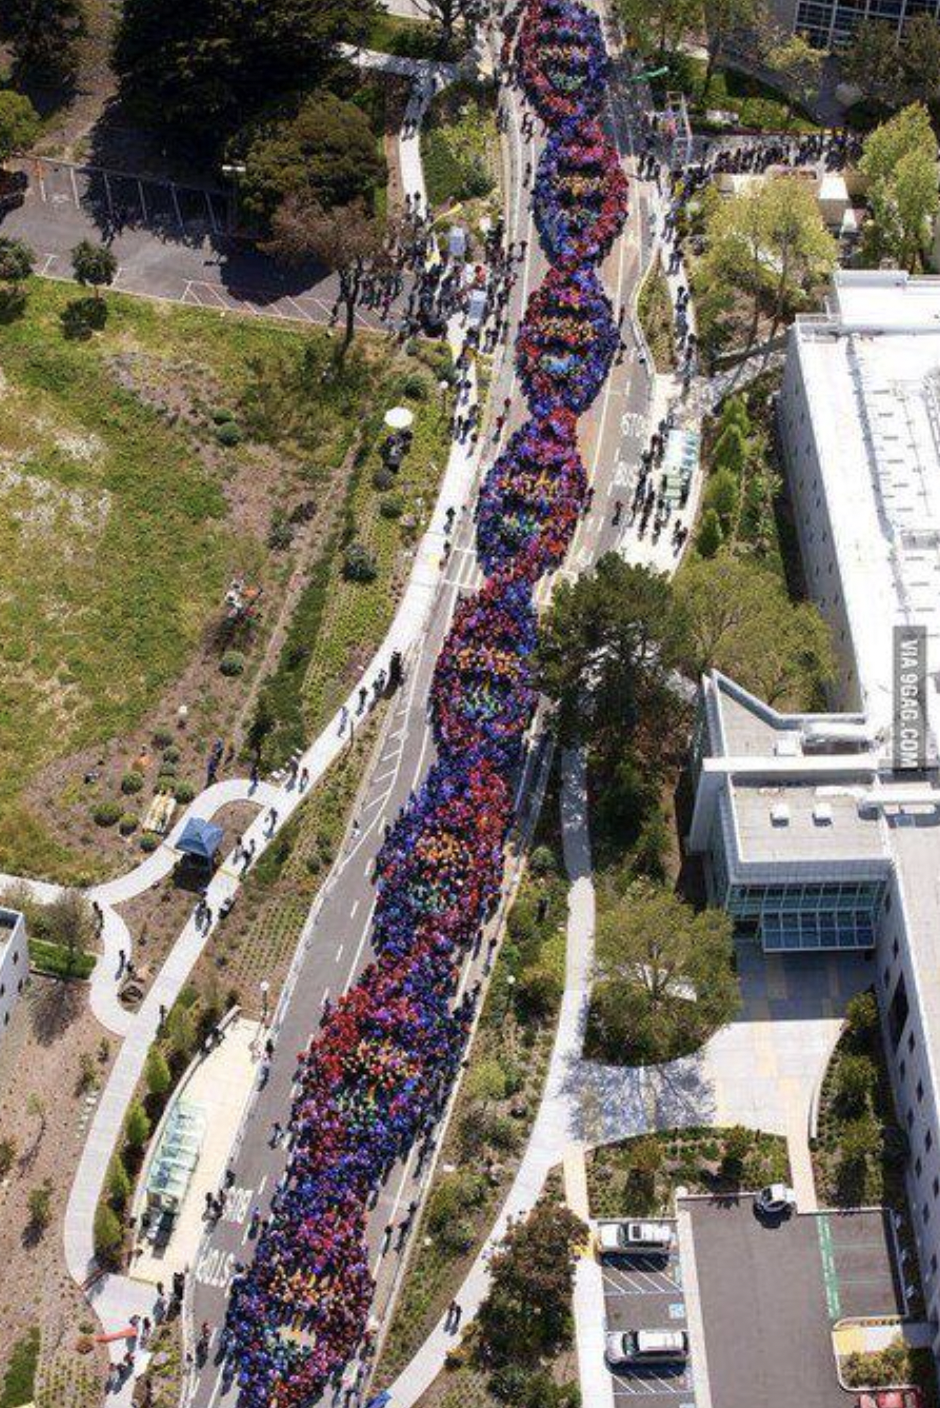 guinness book of world records for largest human dna helix